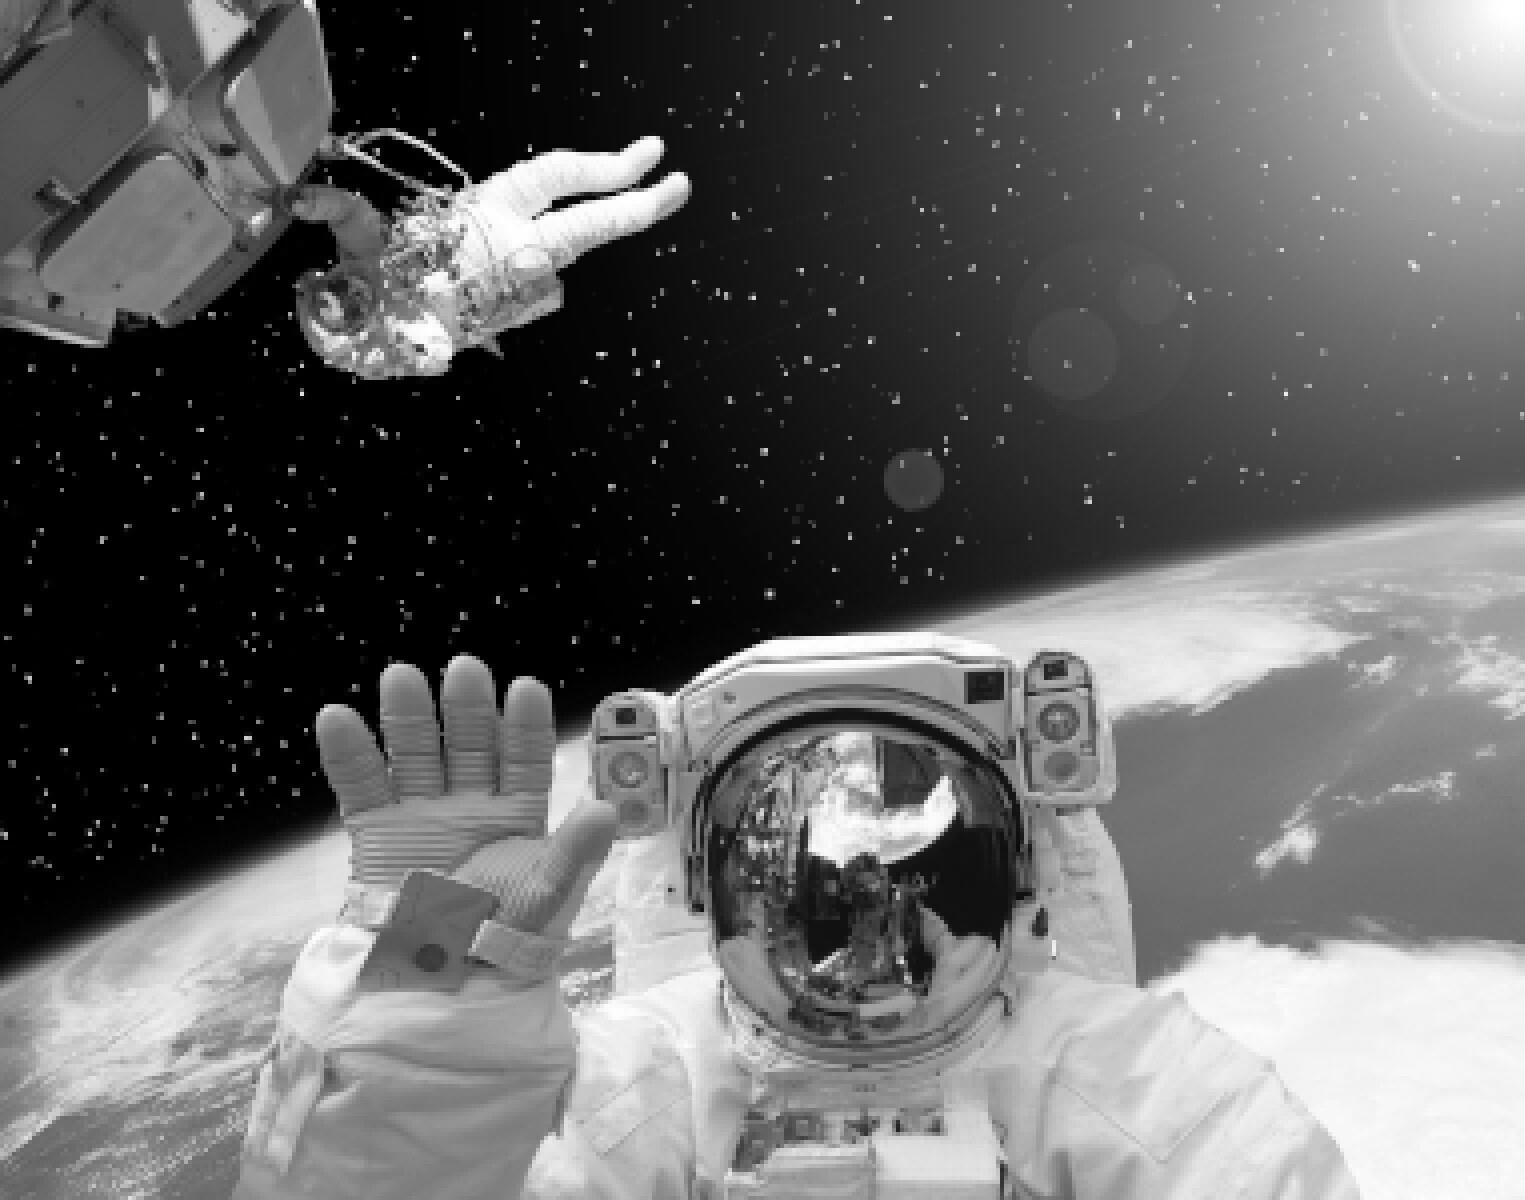 <p>Well, it’s almost like regular tourism: travel for recreational and leisure purposes… but in outer space. Some organizations like the <a href="http://www.commercialspaceflight.org/" rel="noreferrer noopener">Commercial Spaceflight Federation</a> and the <a href="http://www.citizensinspace.org/" rel="noreferrer noopener">Citizens in Space project</a> prefer to use the terms “personal spaceflight” or “citizen space exploration,” though.</p><p>In a nutshell, it’s space travel for non-astronauts.</p>